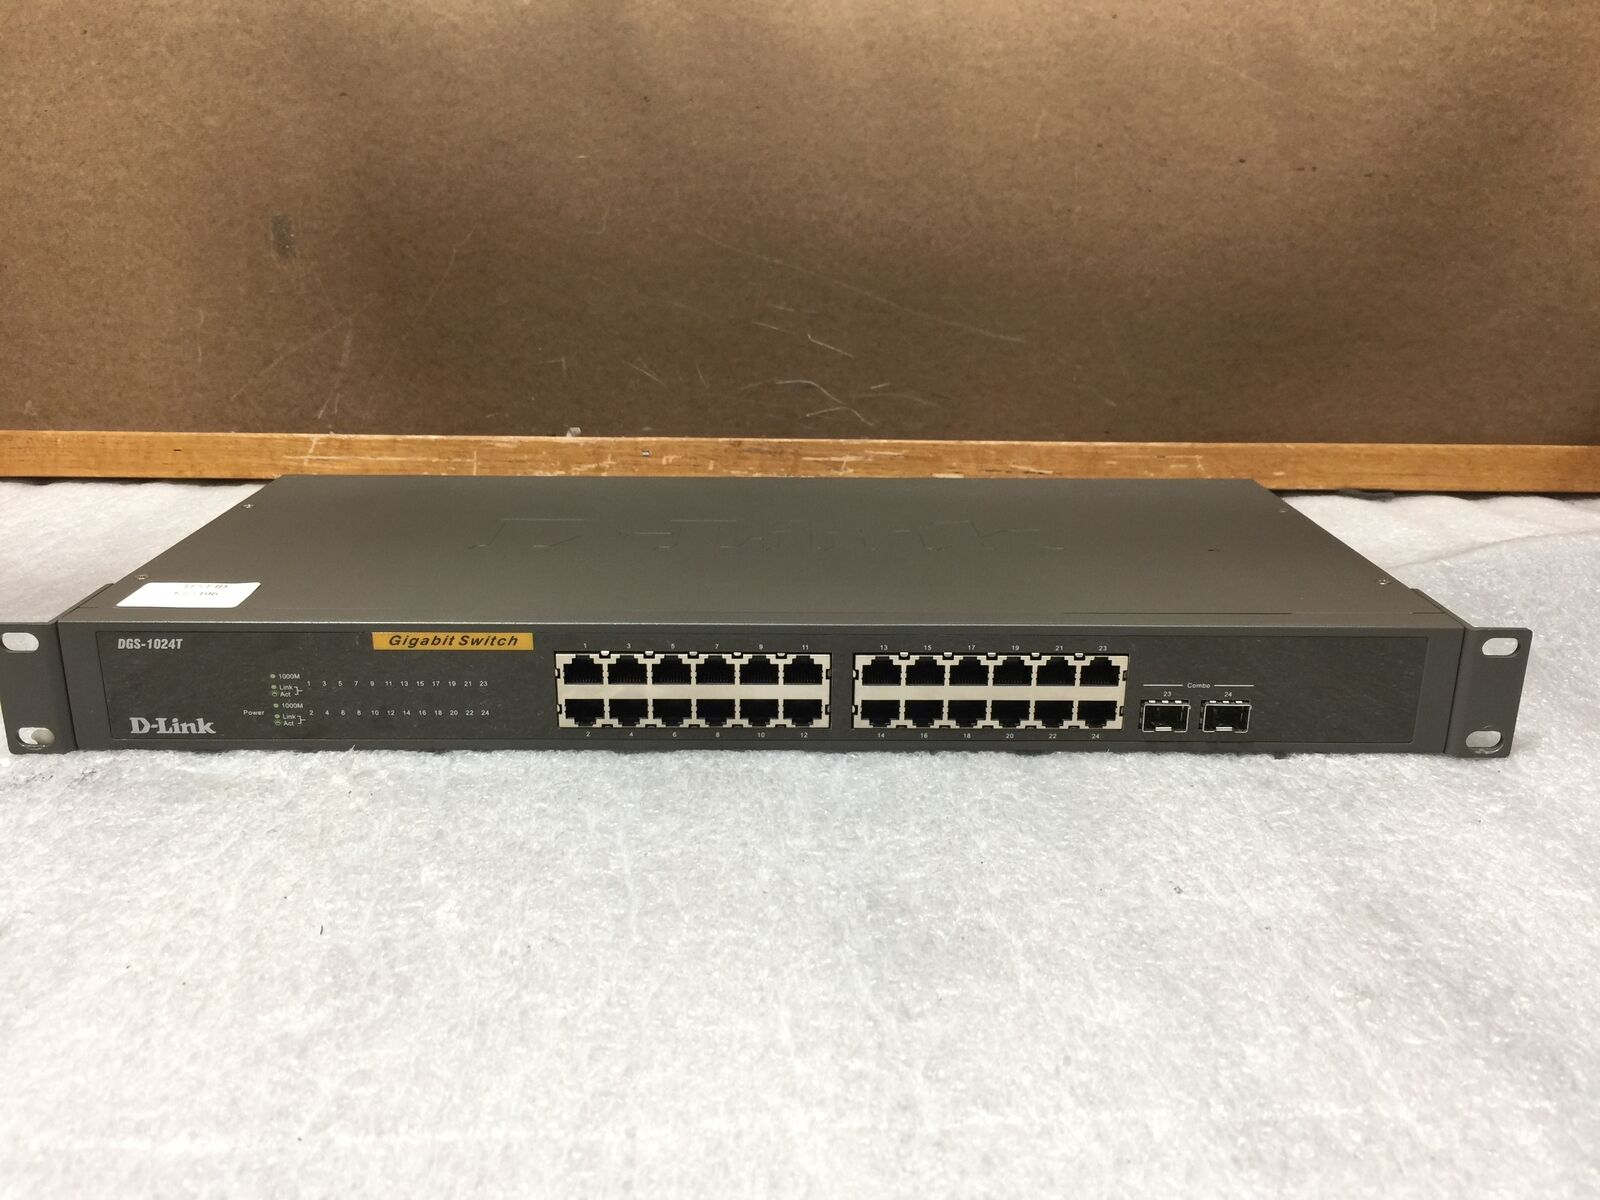 D-link DGS-1024T 24 Port Gigabit Switch w/Rack Ears, Good Condition, Tested